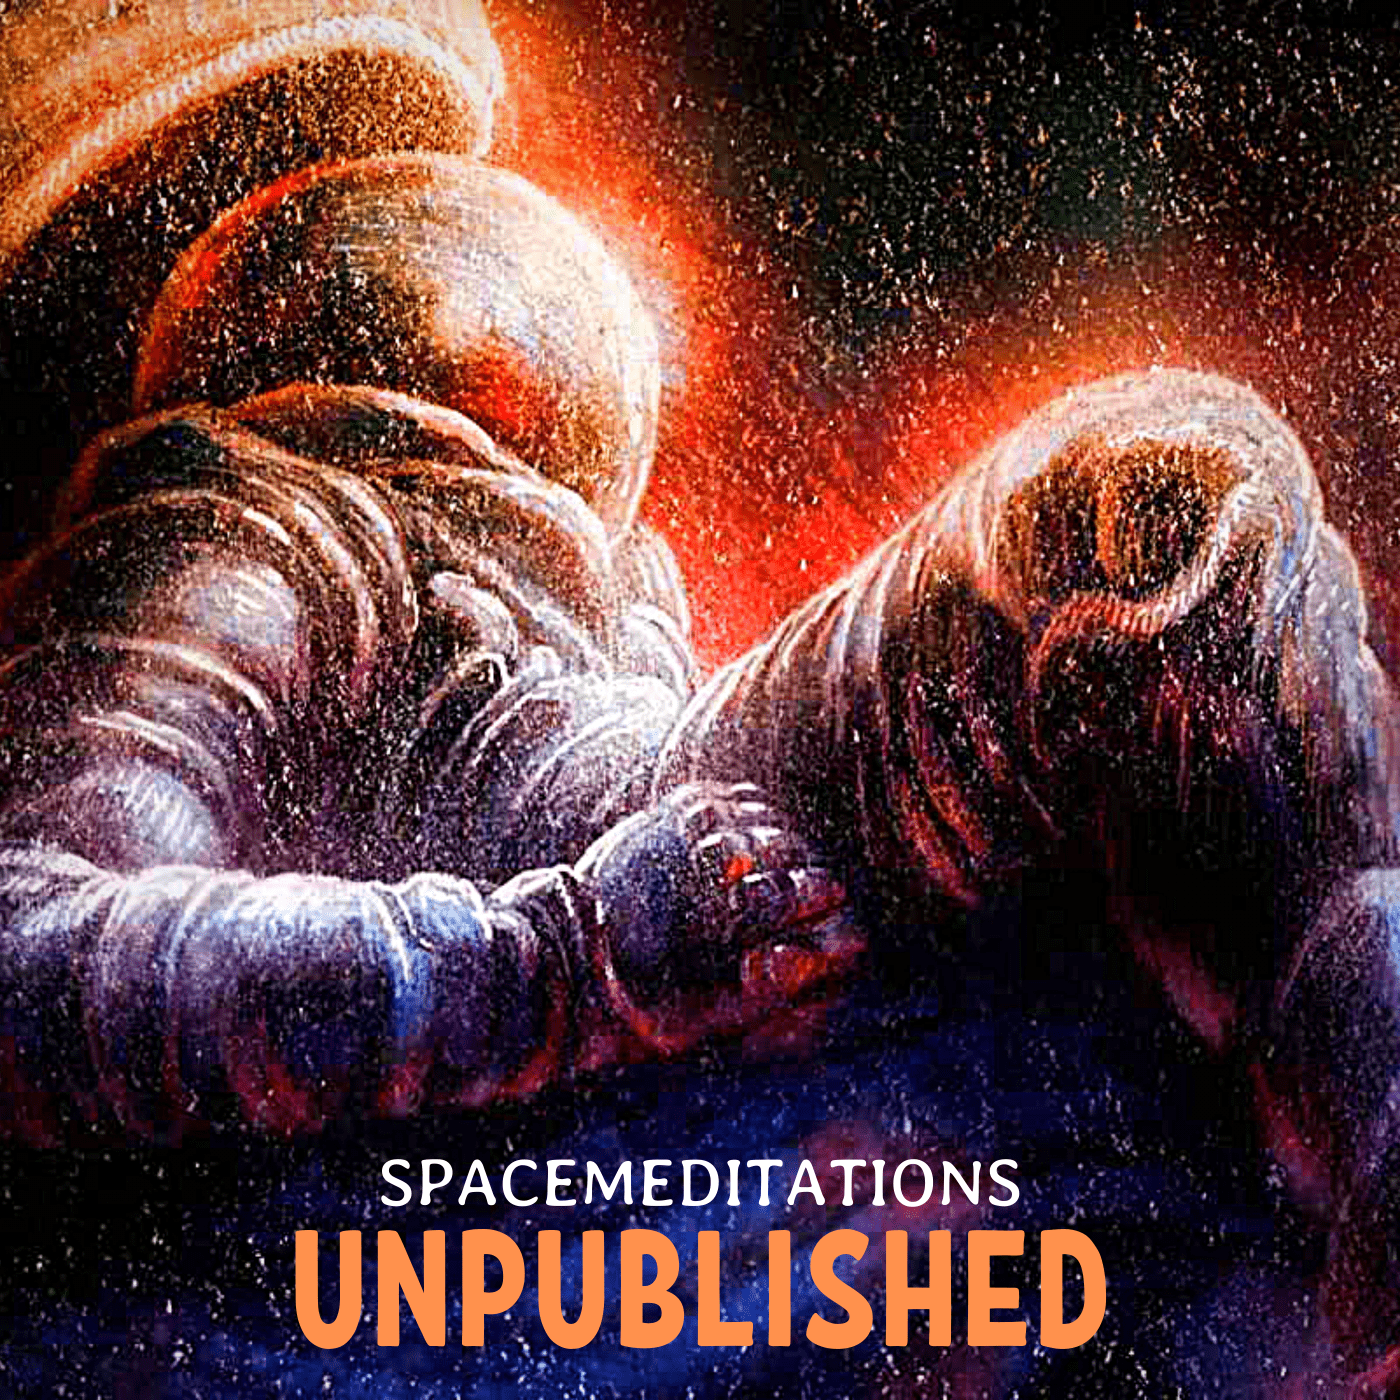 Unpublished. Spacemeditations